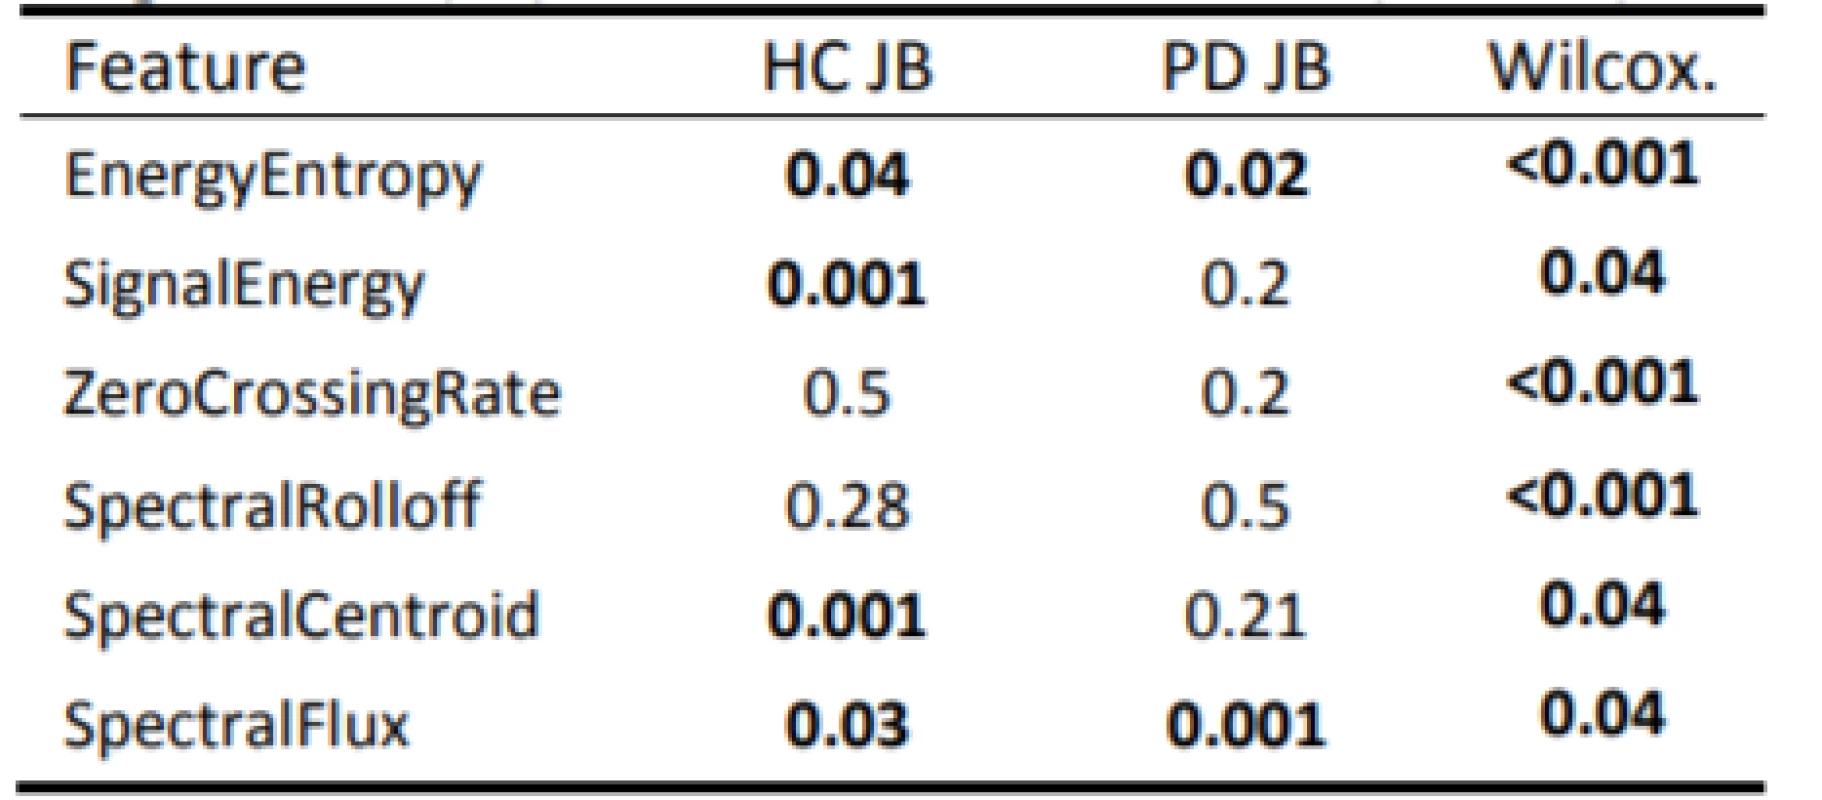 P-values of the performed statistical tests:
Jarque-Bera (JB); Wilcoxon rank sum test (Wilcox.).